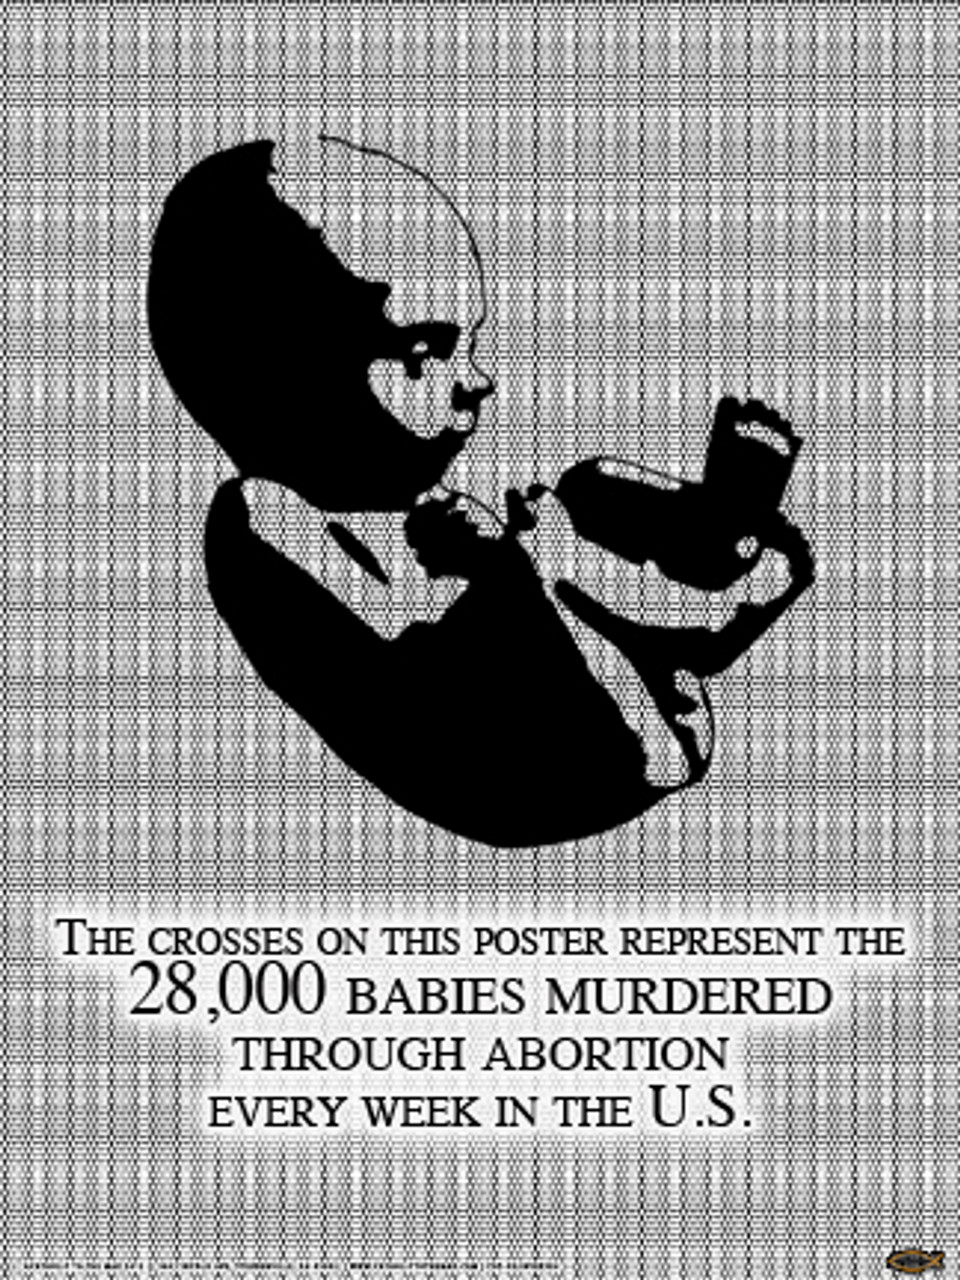 Abortion Crosses Poster - Catholic to the Max - Online Catholic Store